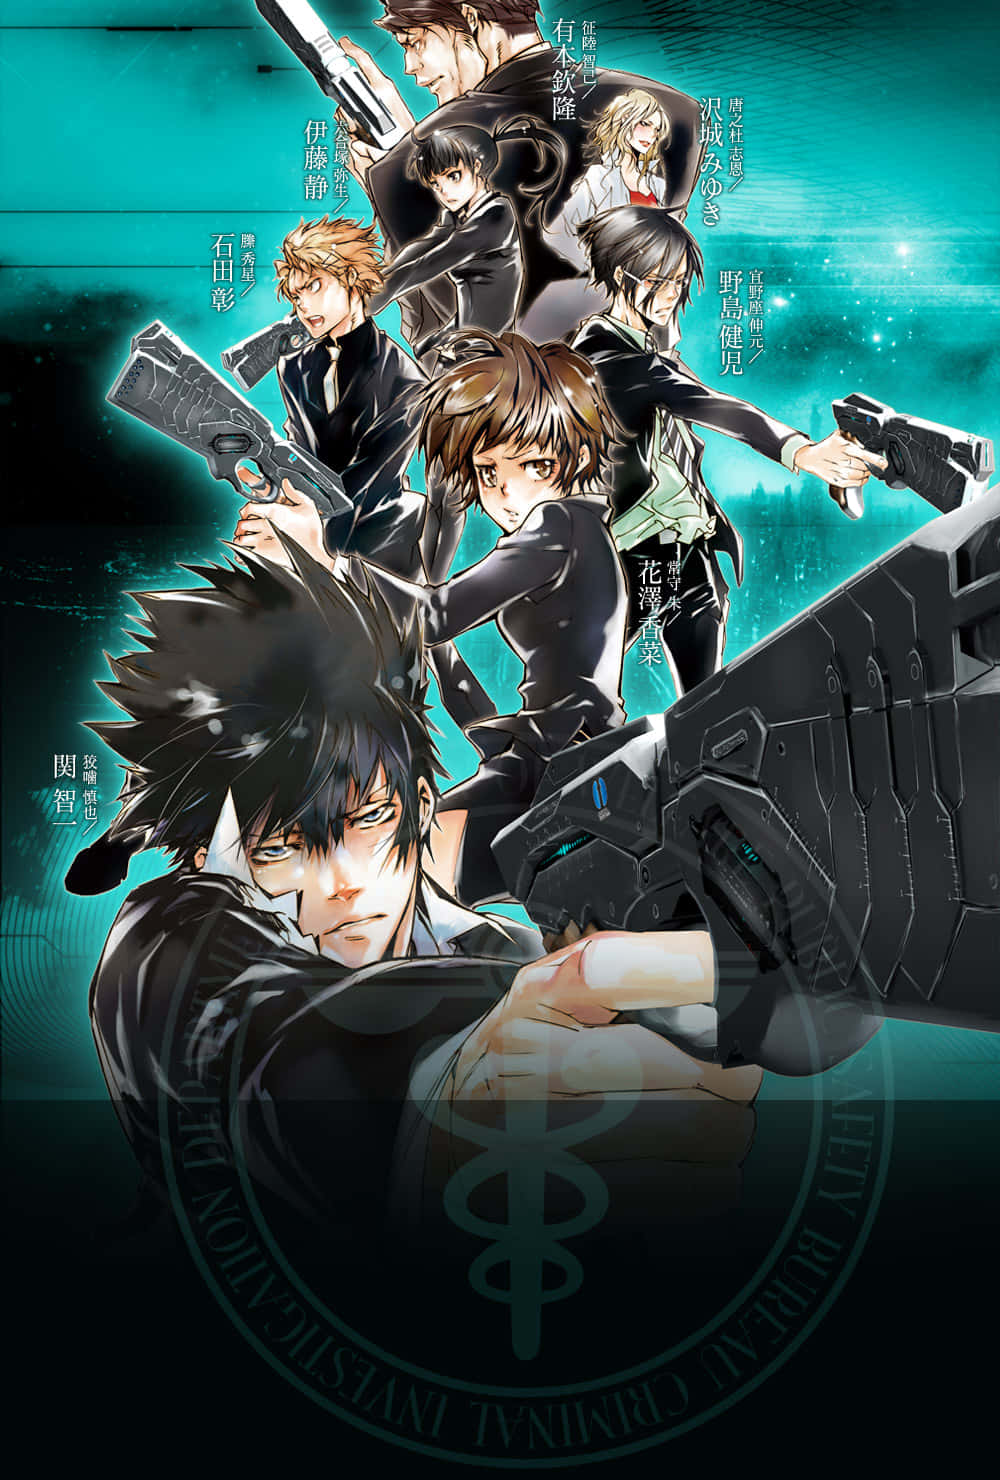 Step into the world of Psycho Pass and explore the dark future set in Japan Wallpaper